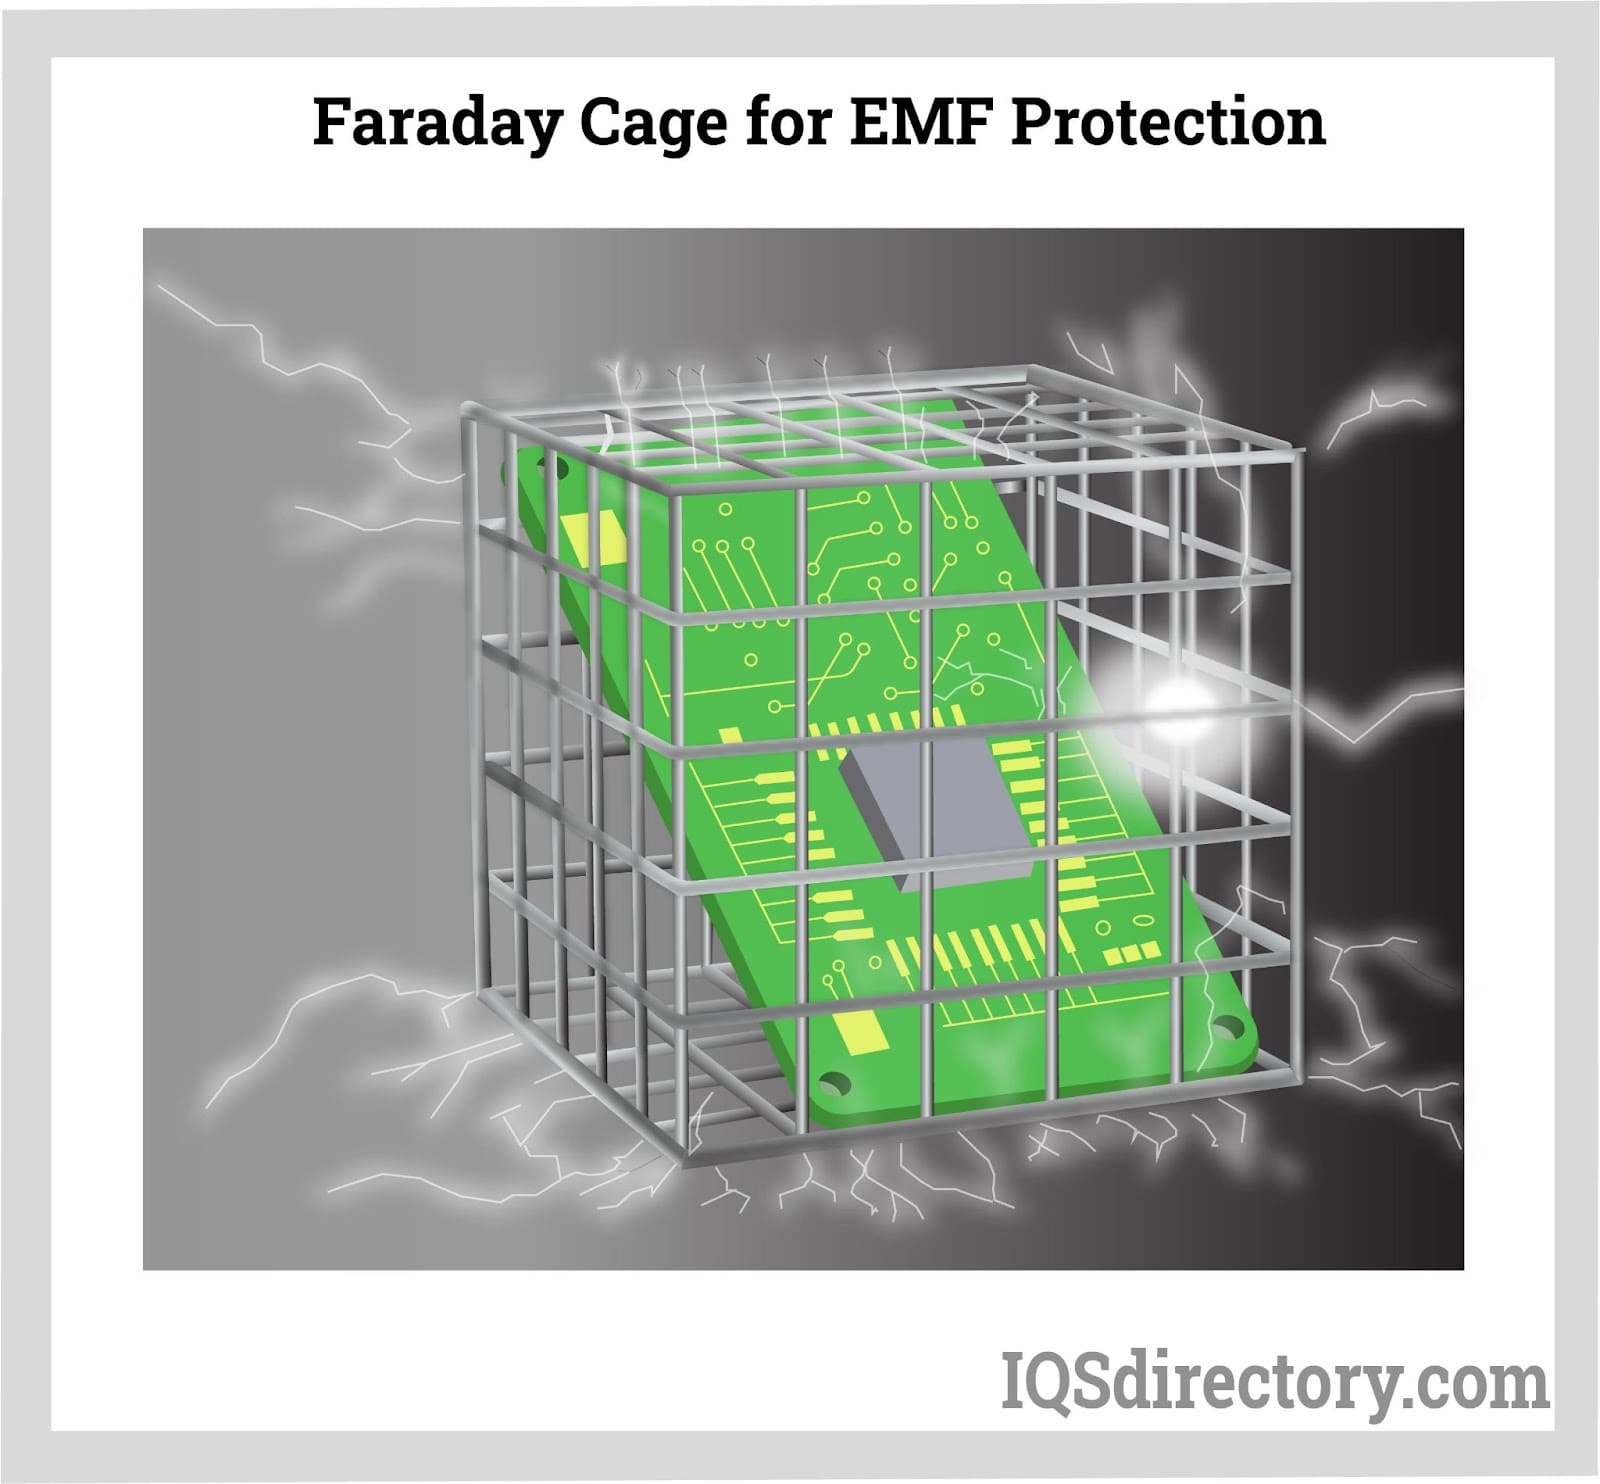 DIY faraday cage for blocking EMI : r/AskElectricians